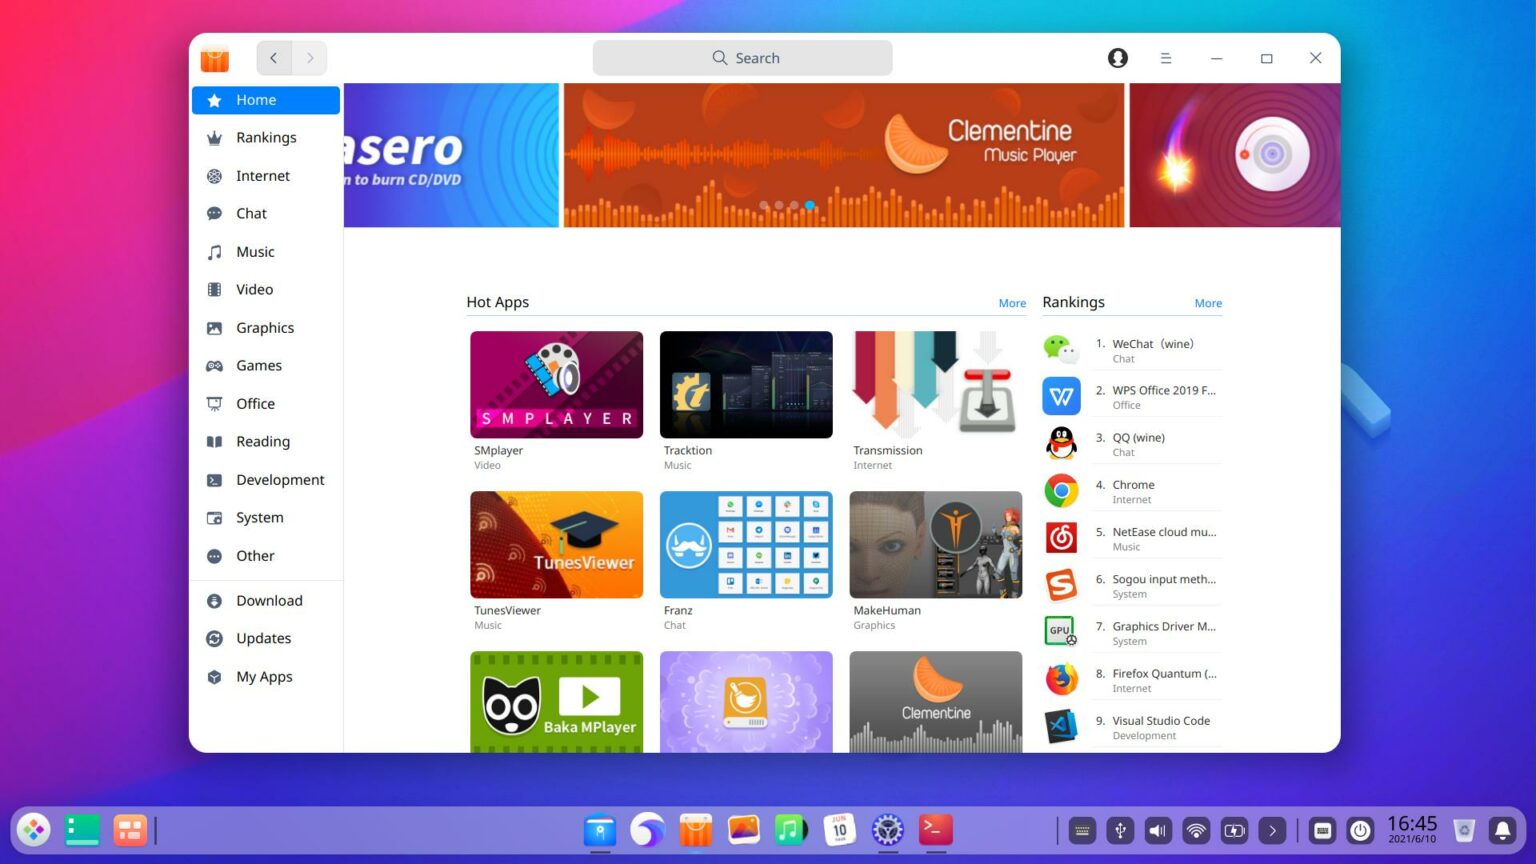 Deepin The Most Beautiful Linux Distro For Beginners In 2021 Fostips 